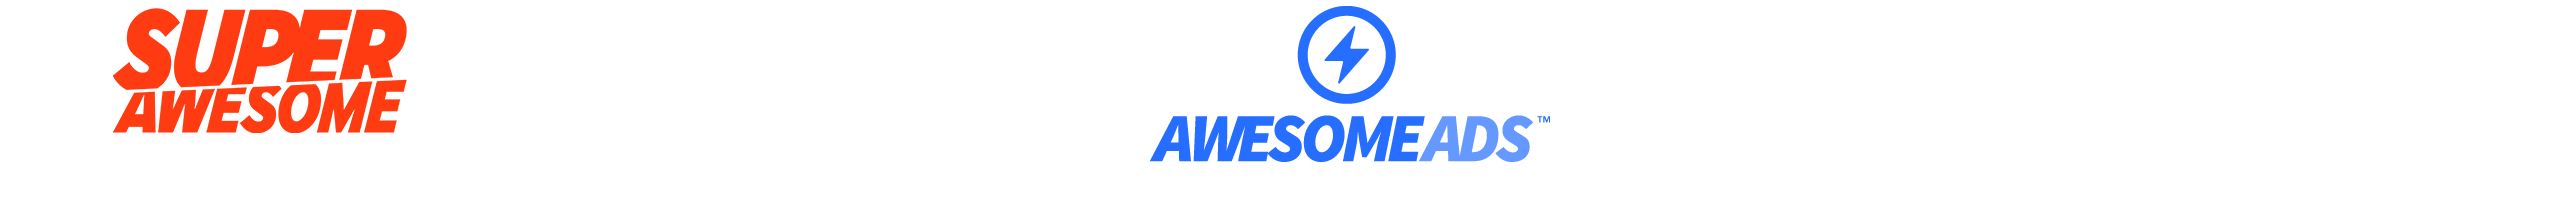 AwesomeAds Developer Guide